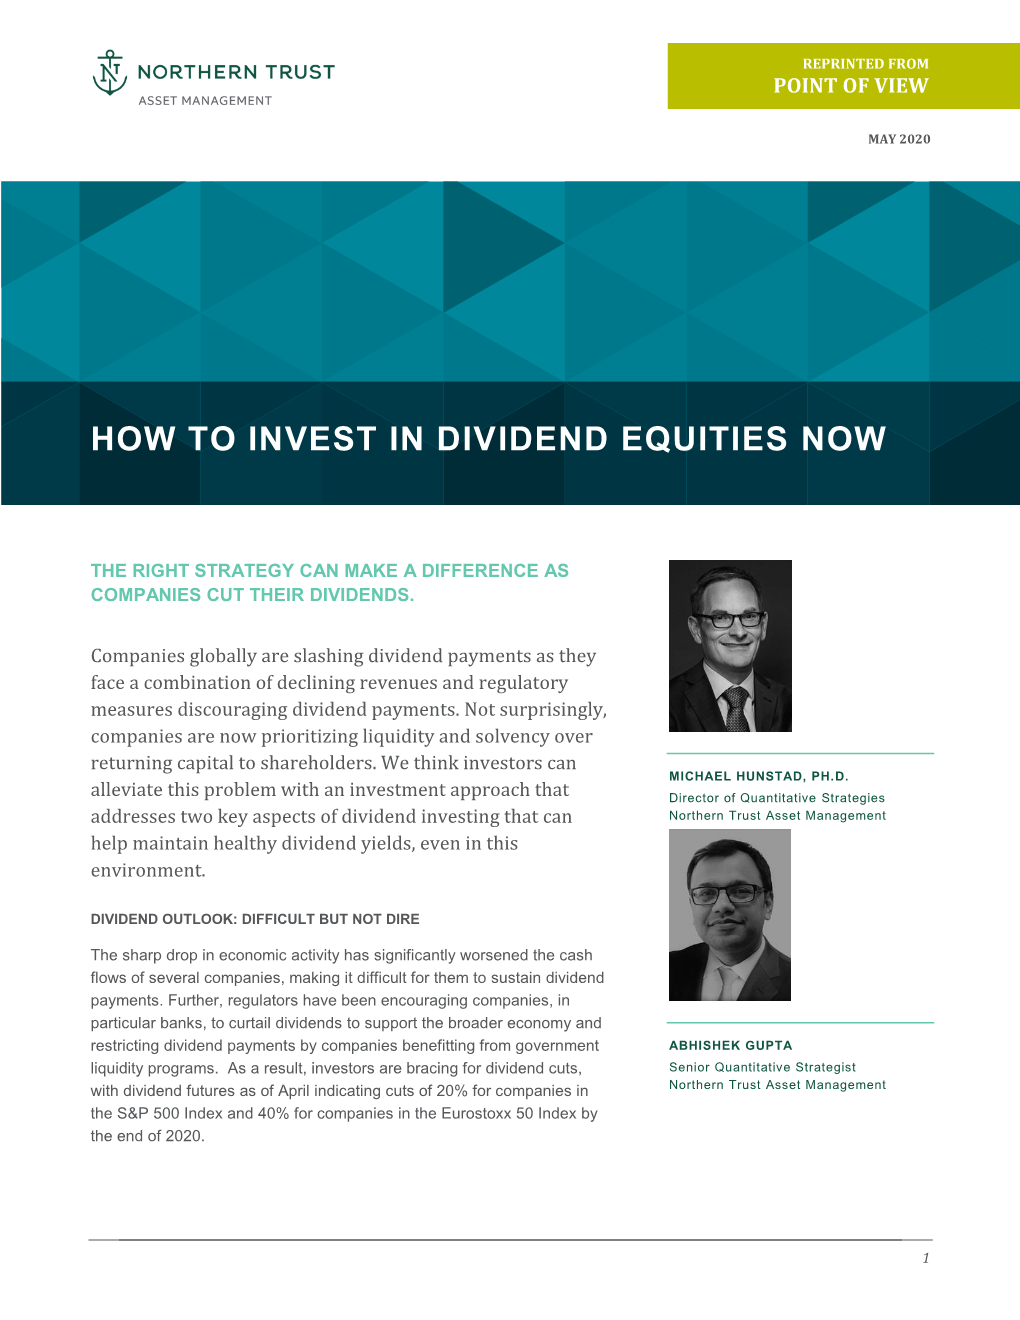 How to Invest in Dividend Equities Now